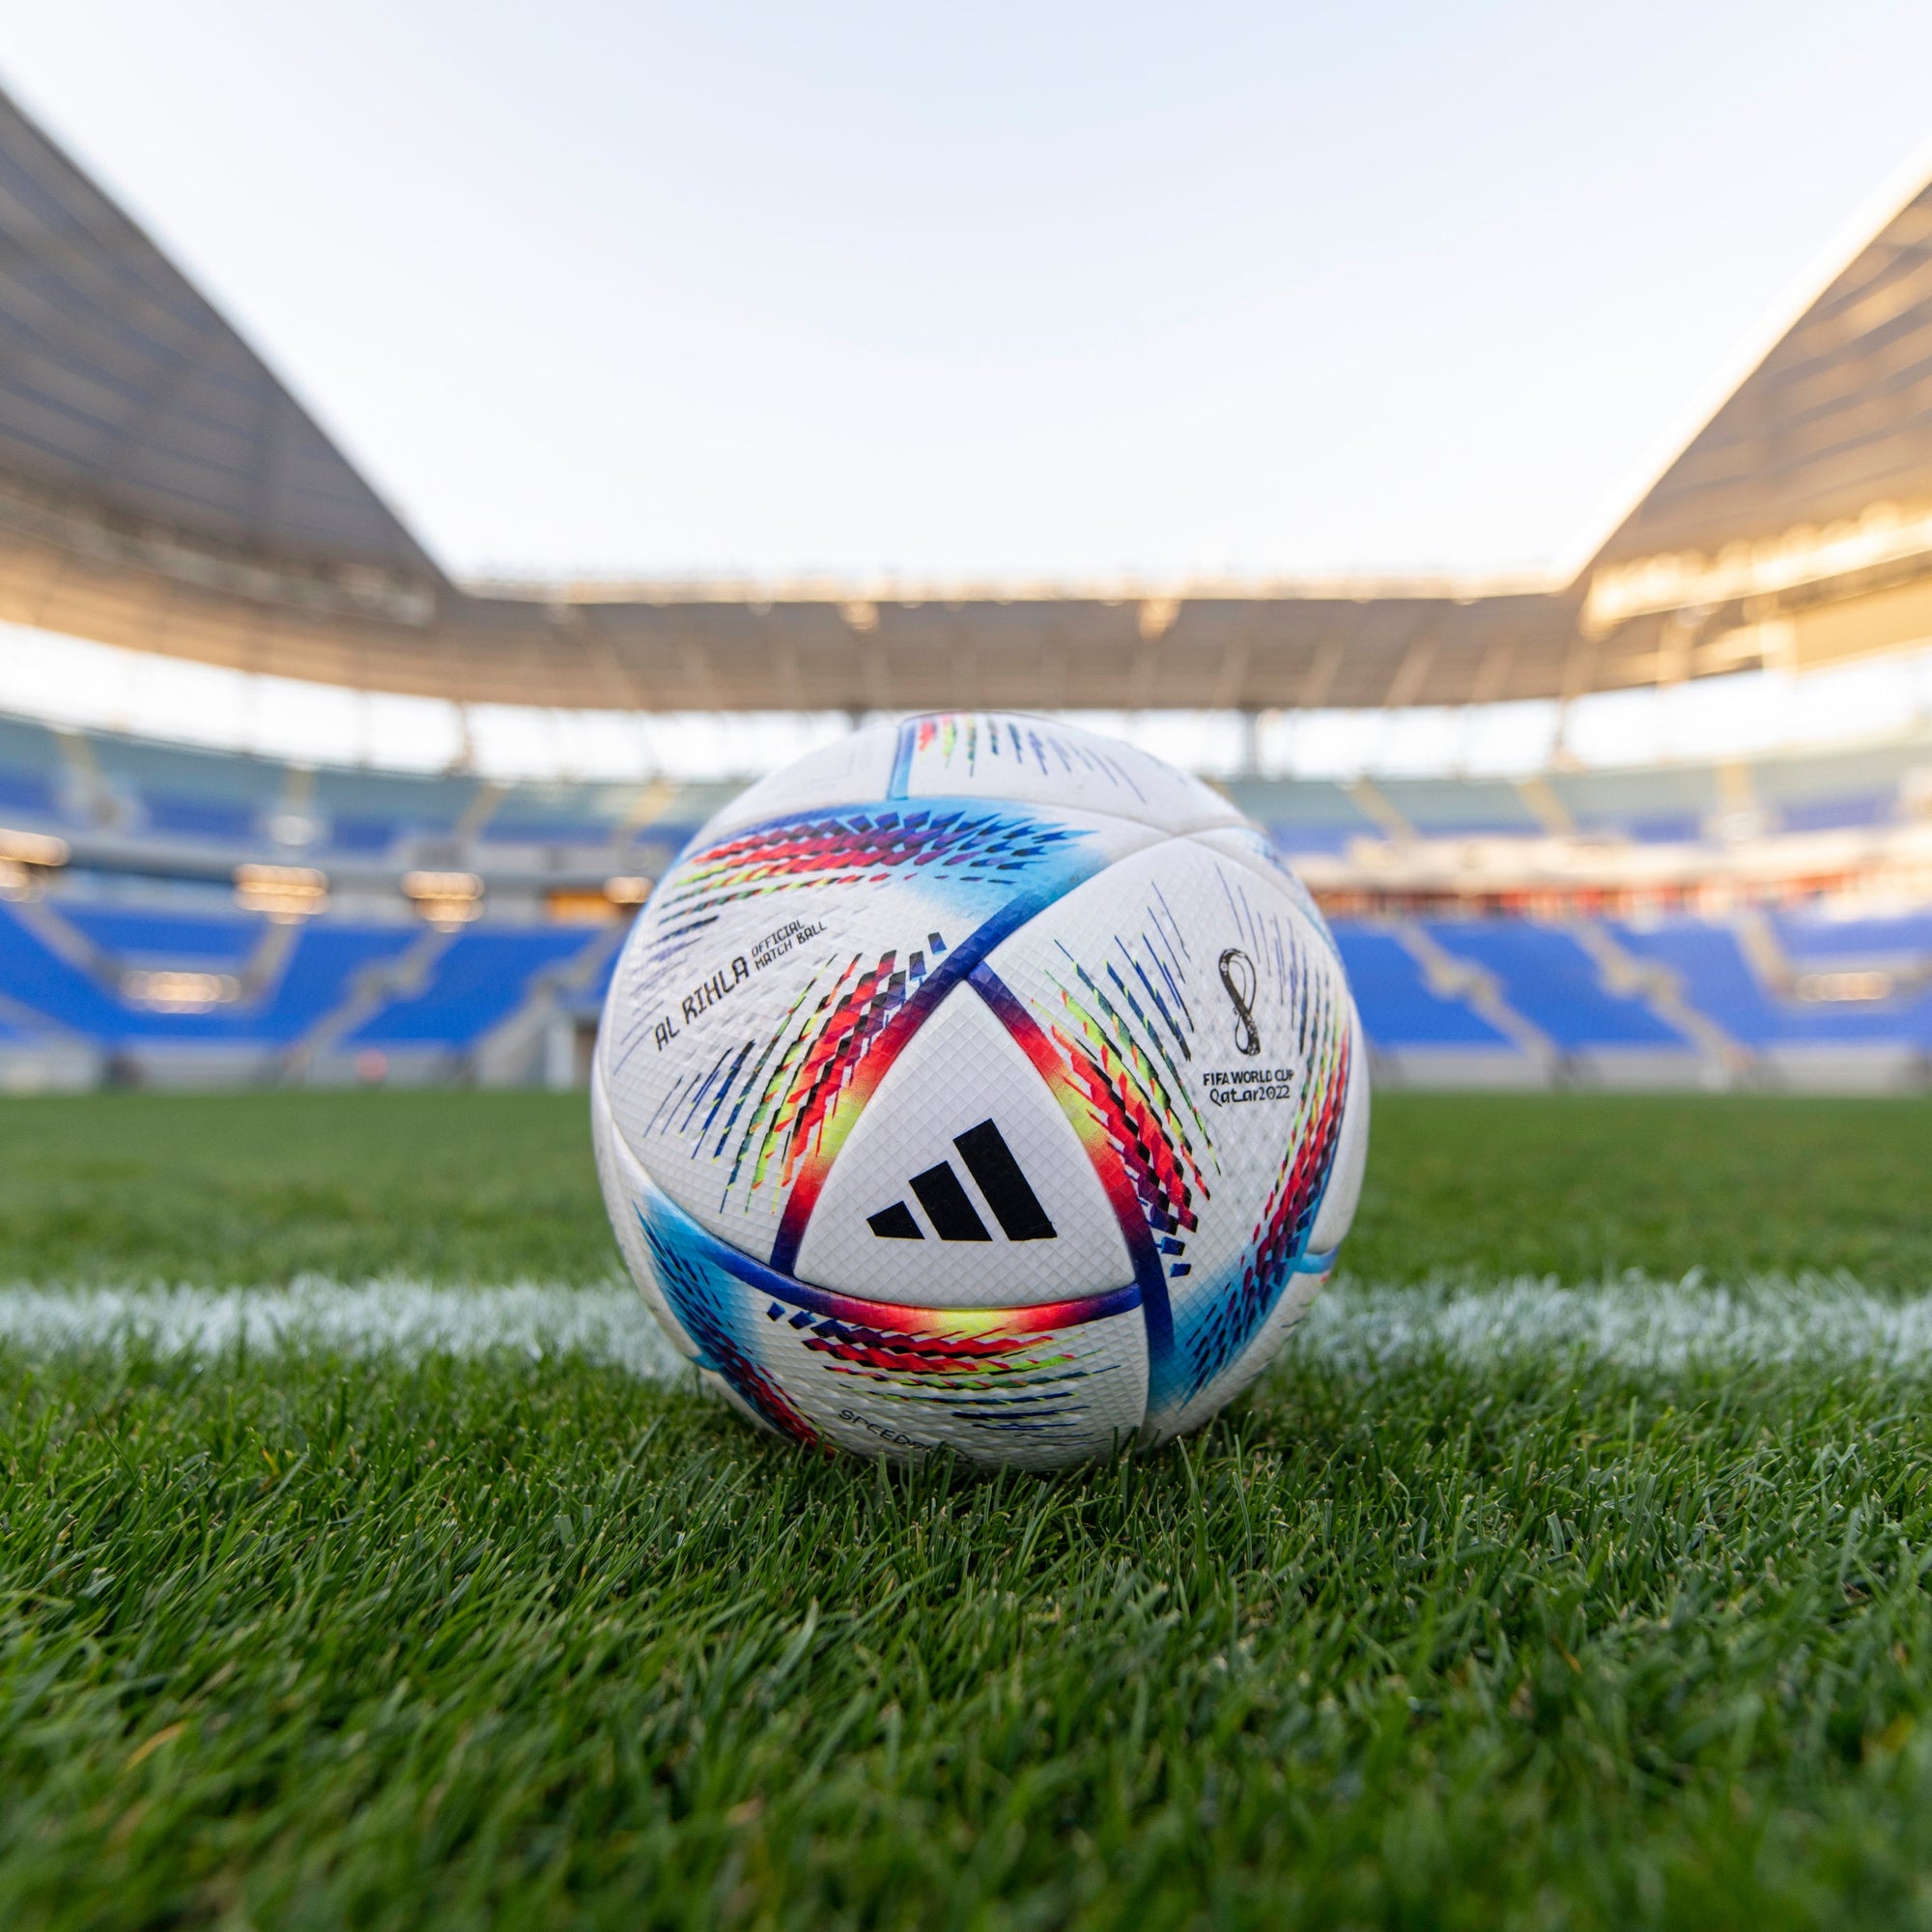 What is the official soccer ball for the 2022 World Cup?